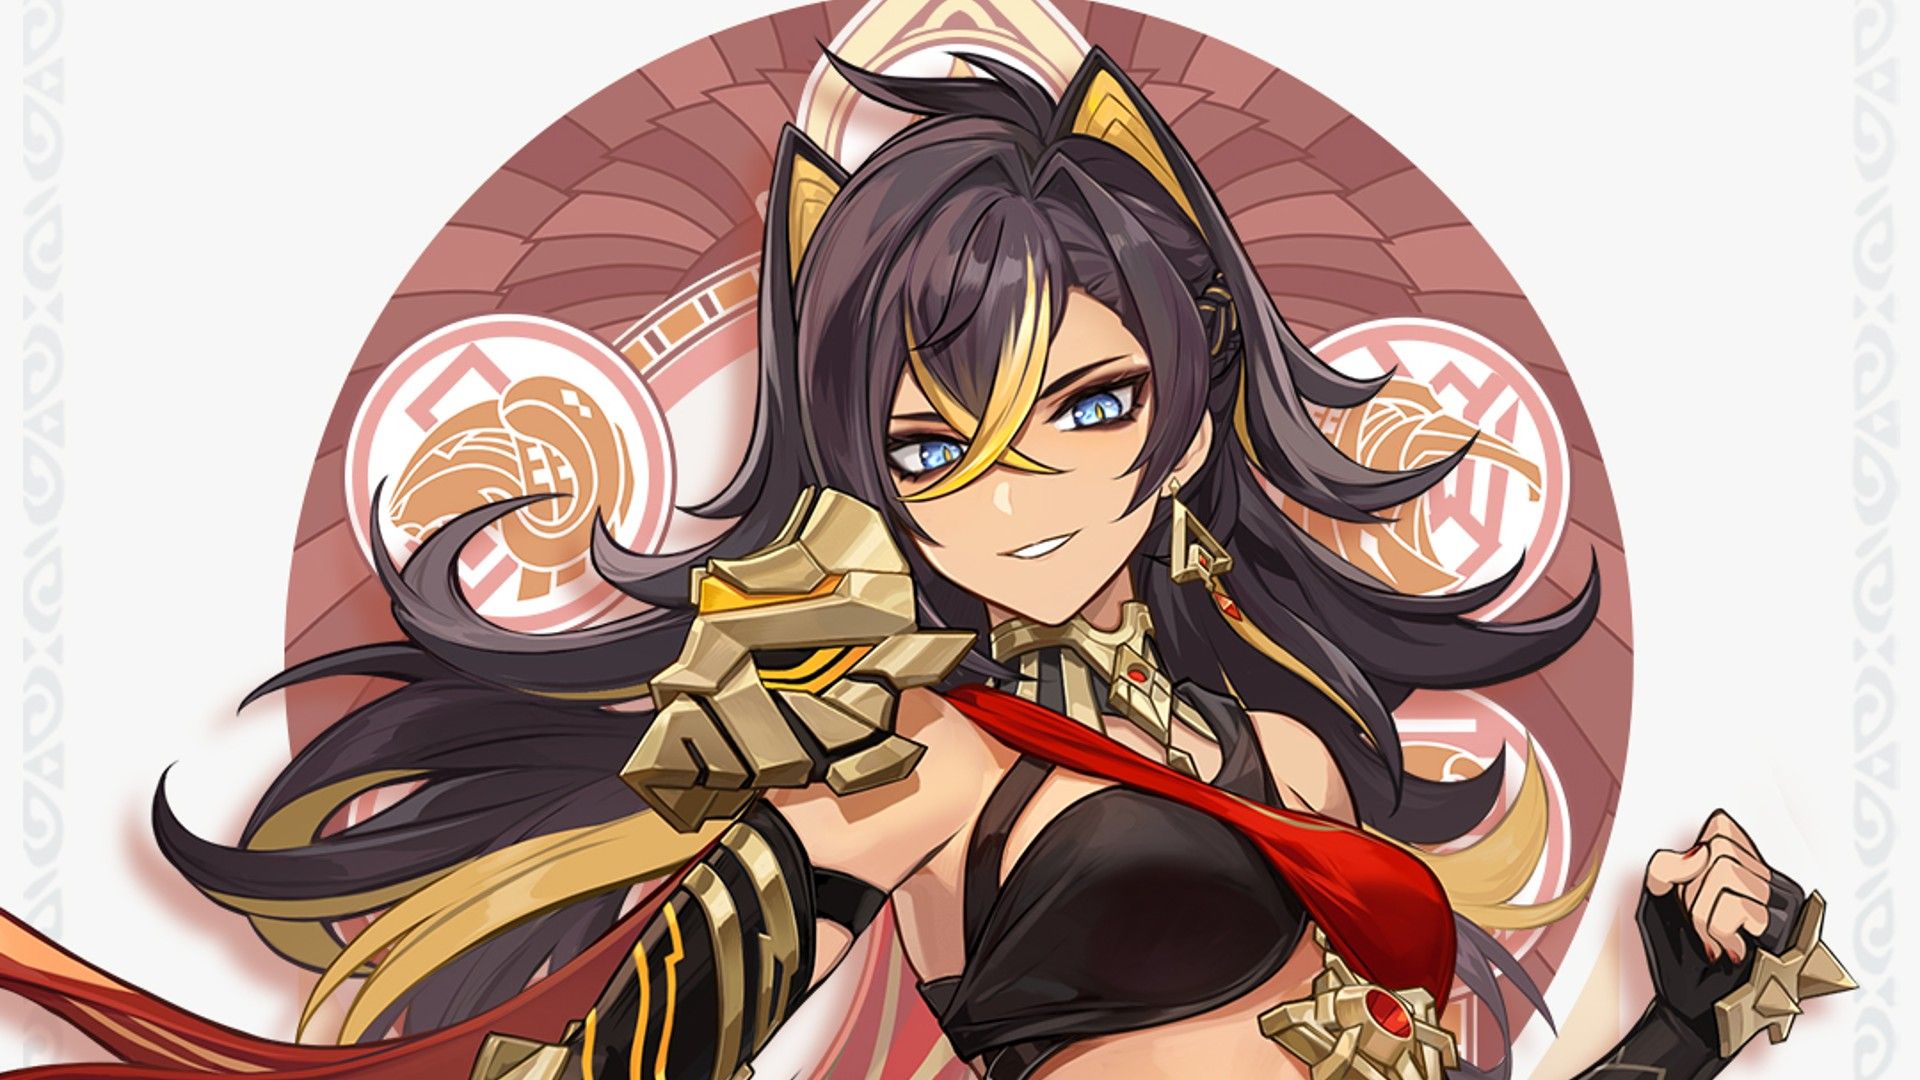 Official Art of Dehya from Genshin Impact